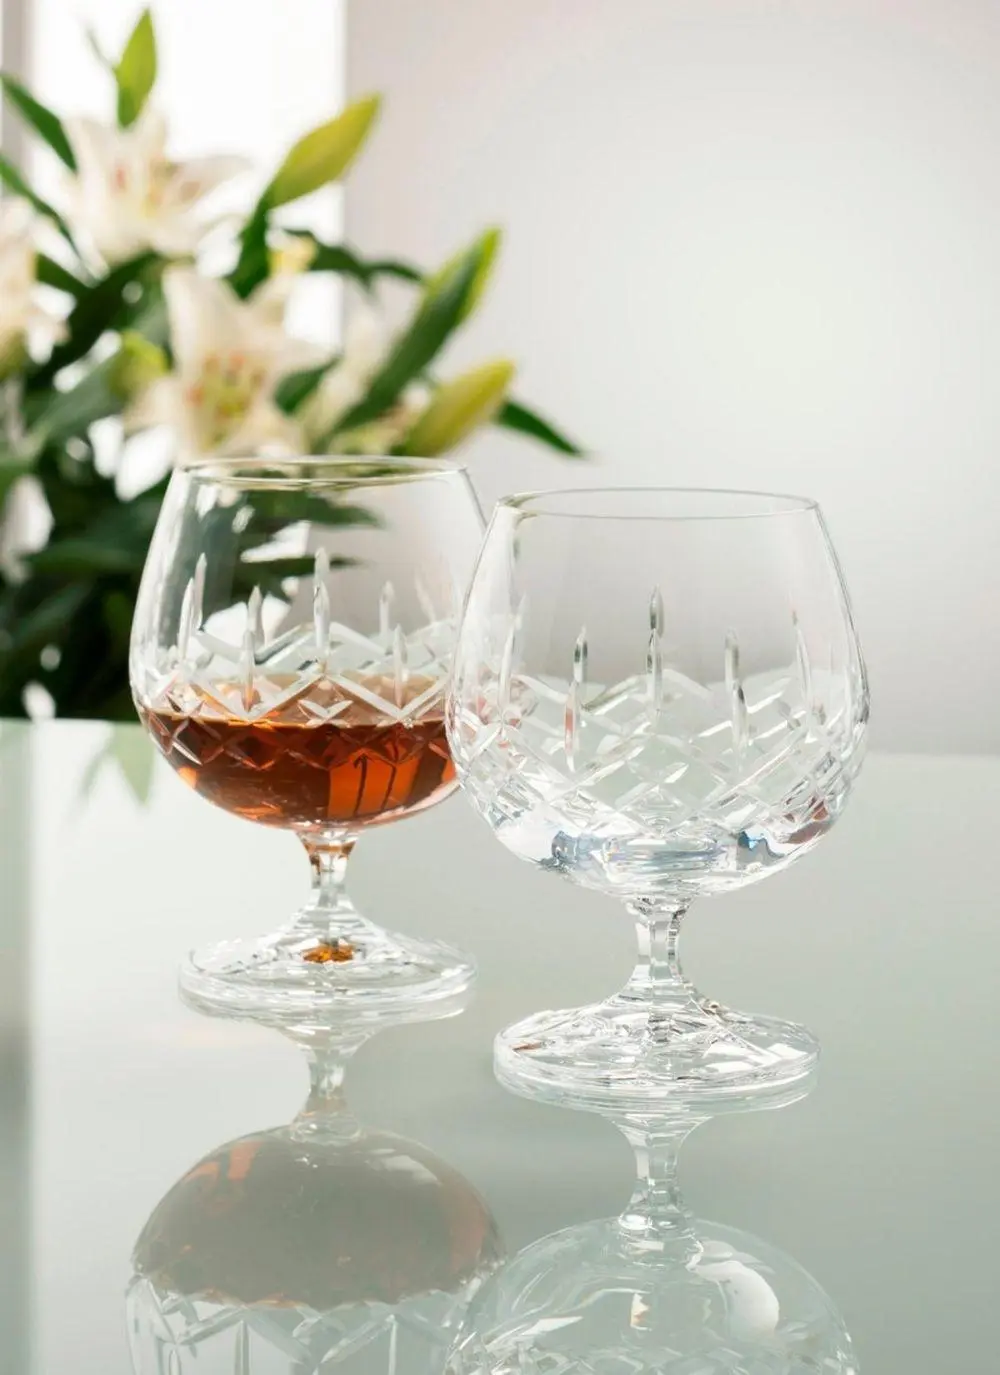 https://www.blarney.com/contentFiles/productImages/Large/galway-crystal-longford-brandy-glass-set-of-2.webp